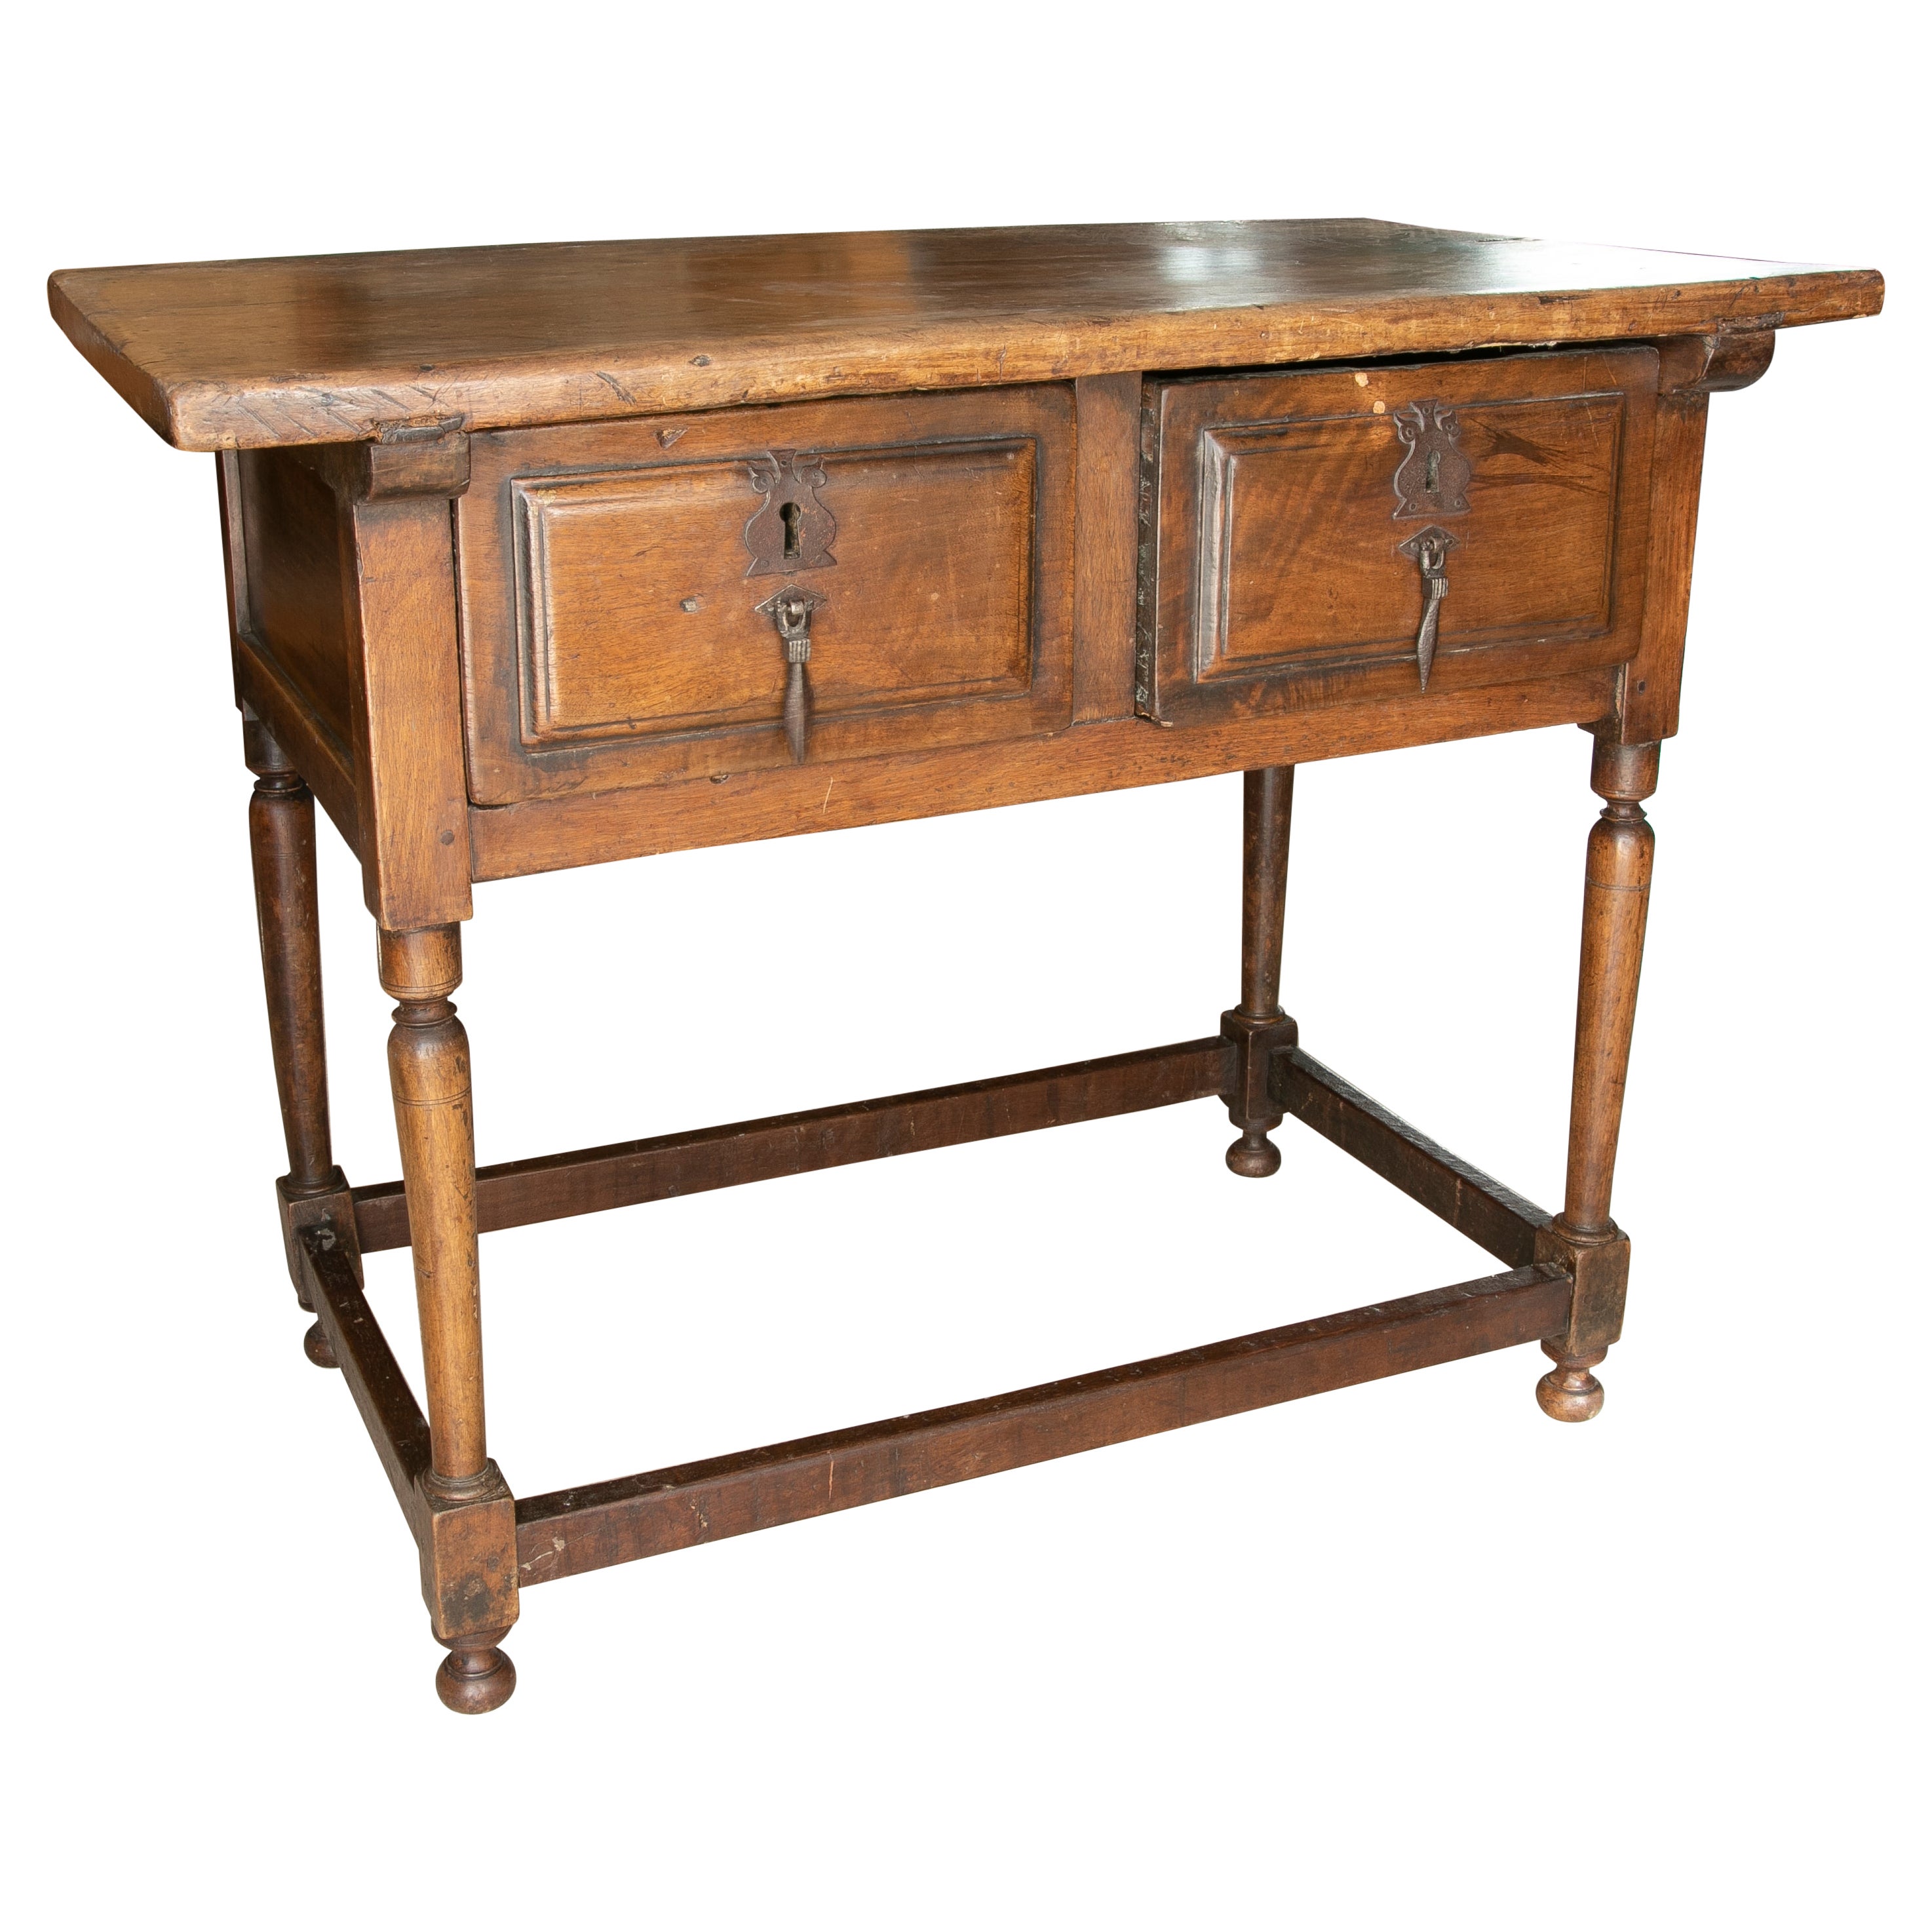 18th Century Walnut Writing Table with Two Drawers and Antique Fittings For Sale